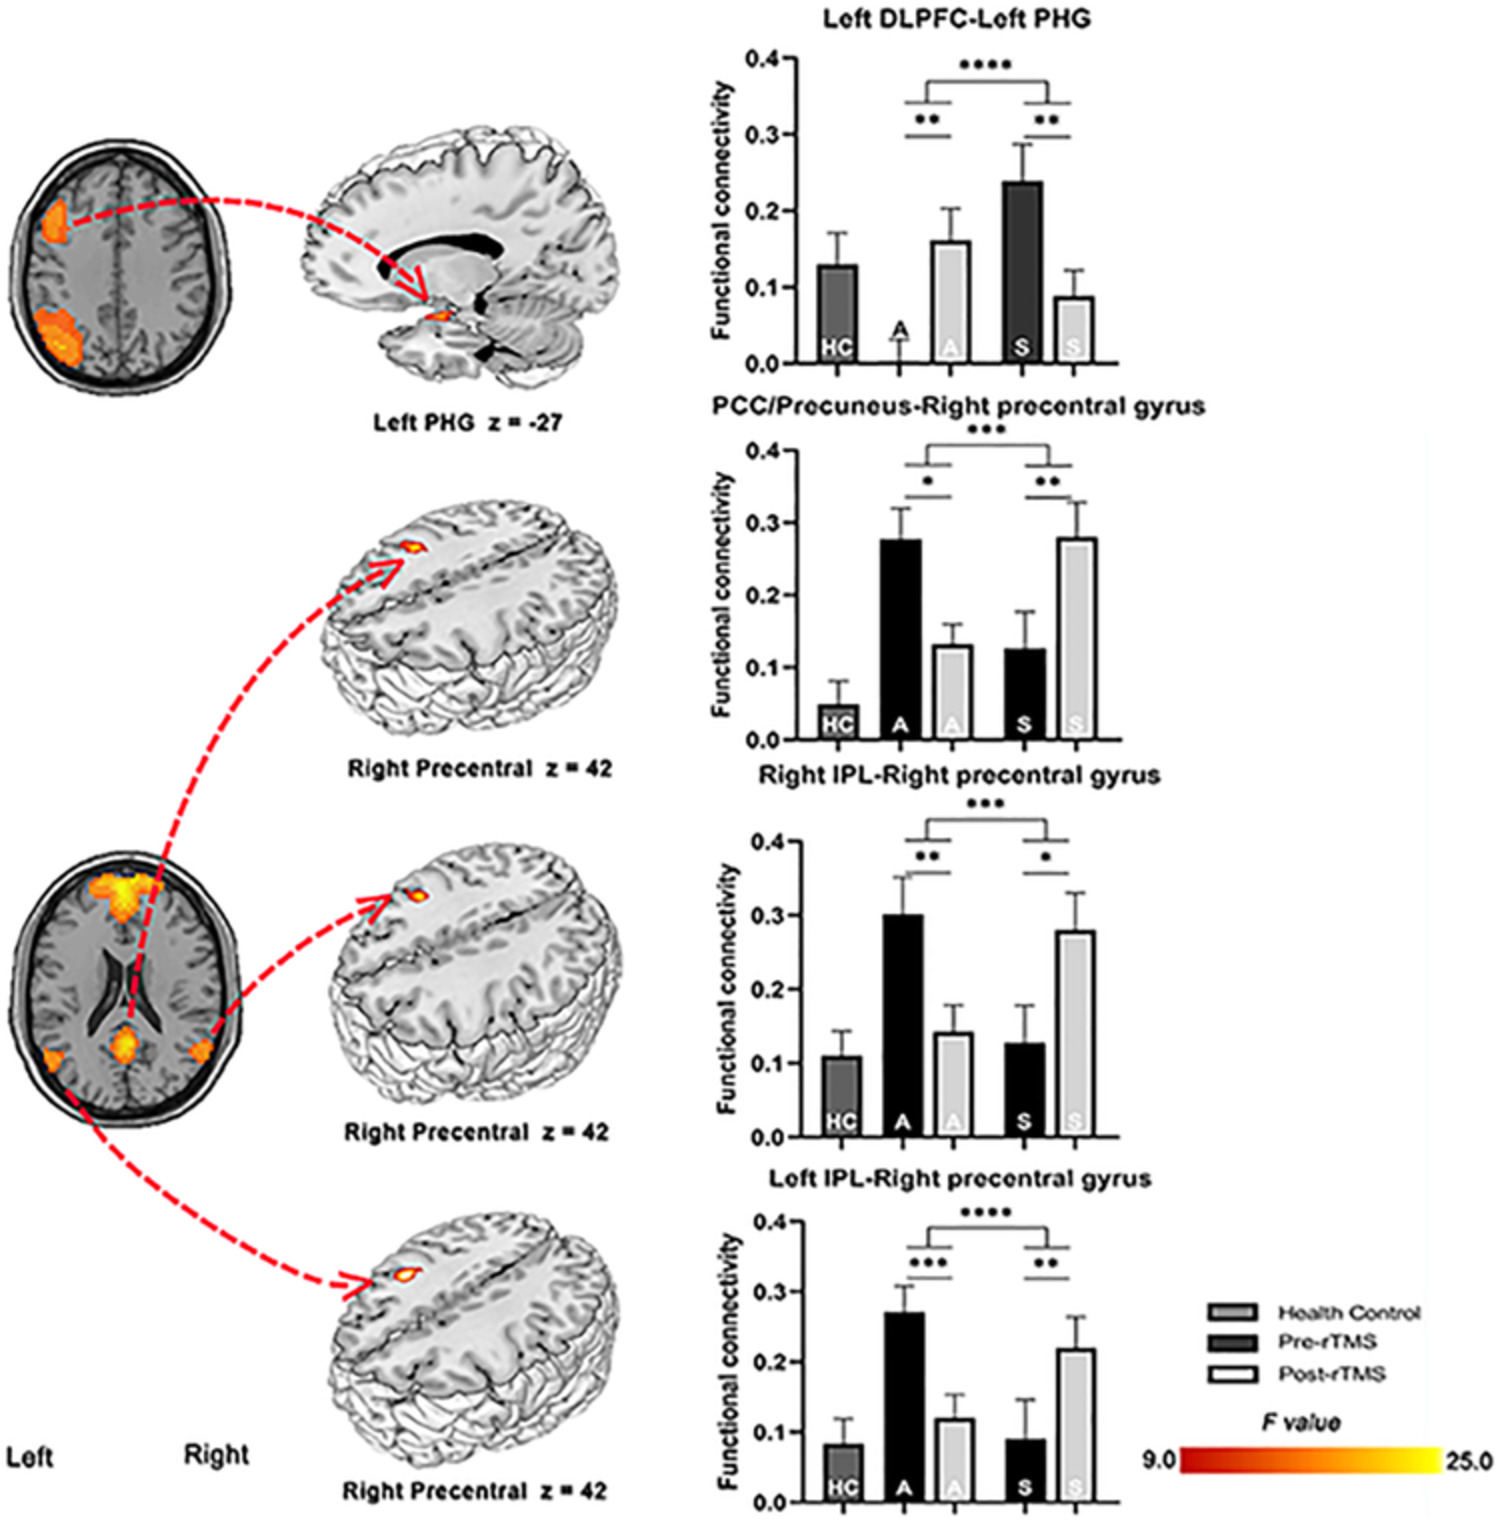 Repetitive transcranial magnetic stimulation modulates coupling among large‐scale brain networks in heroin‐dependent individuals: A randomized resting‐state functional magnetic resonance imaging study